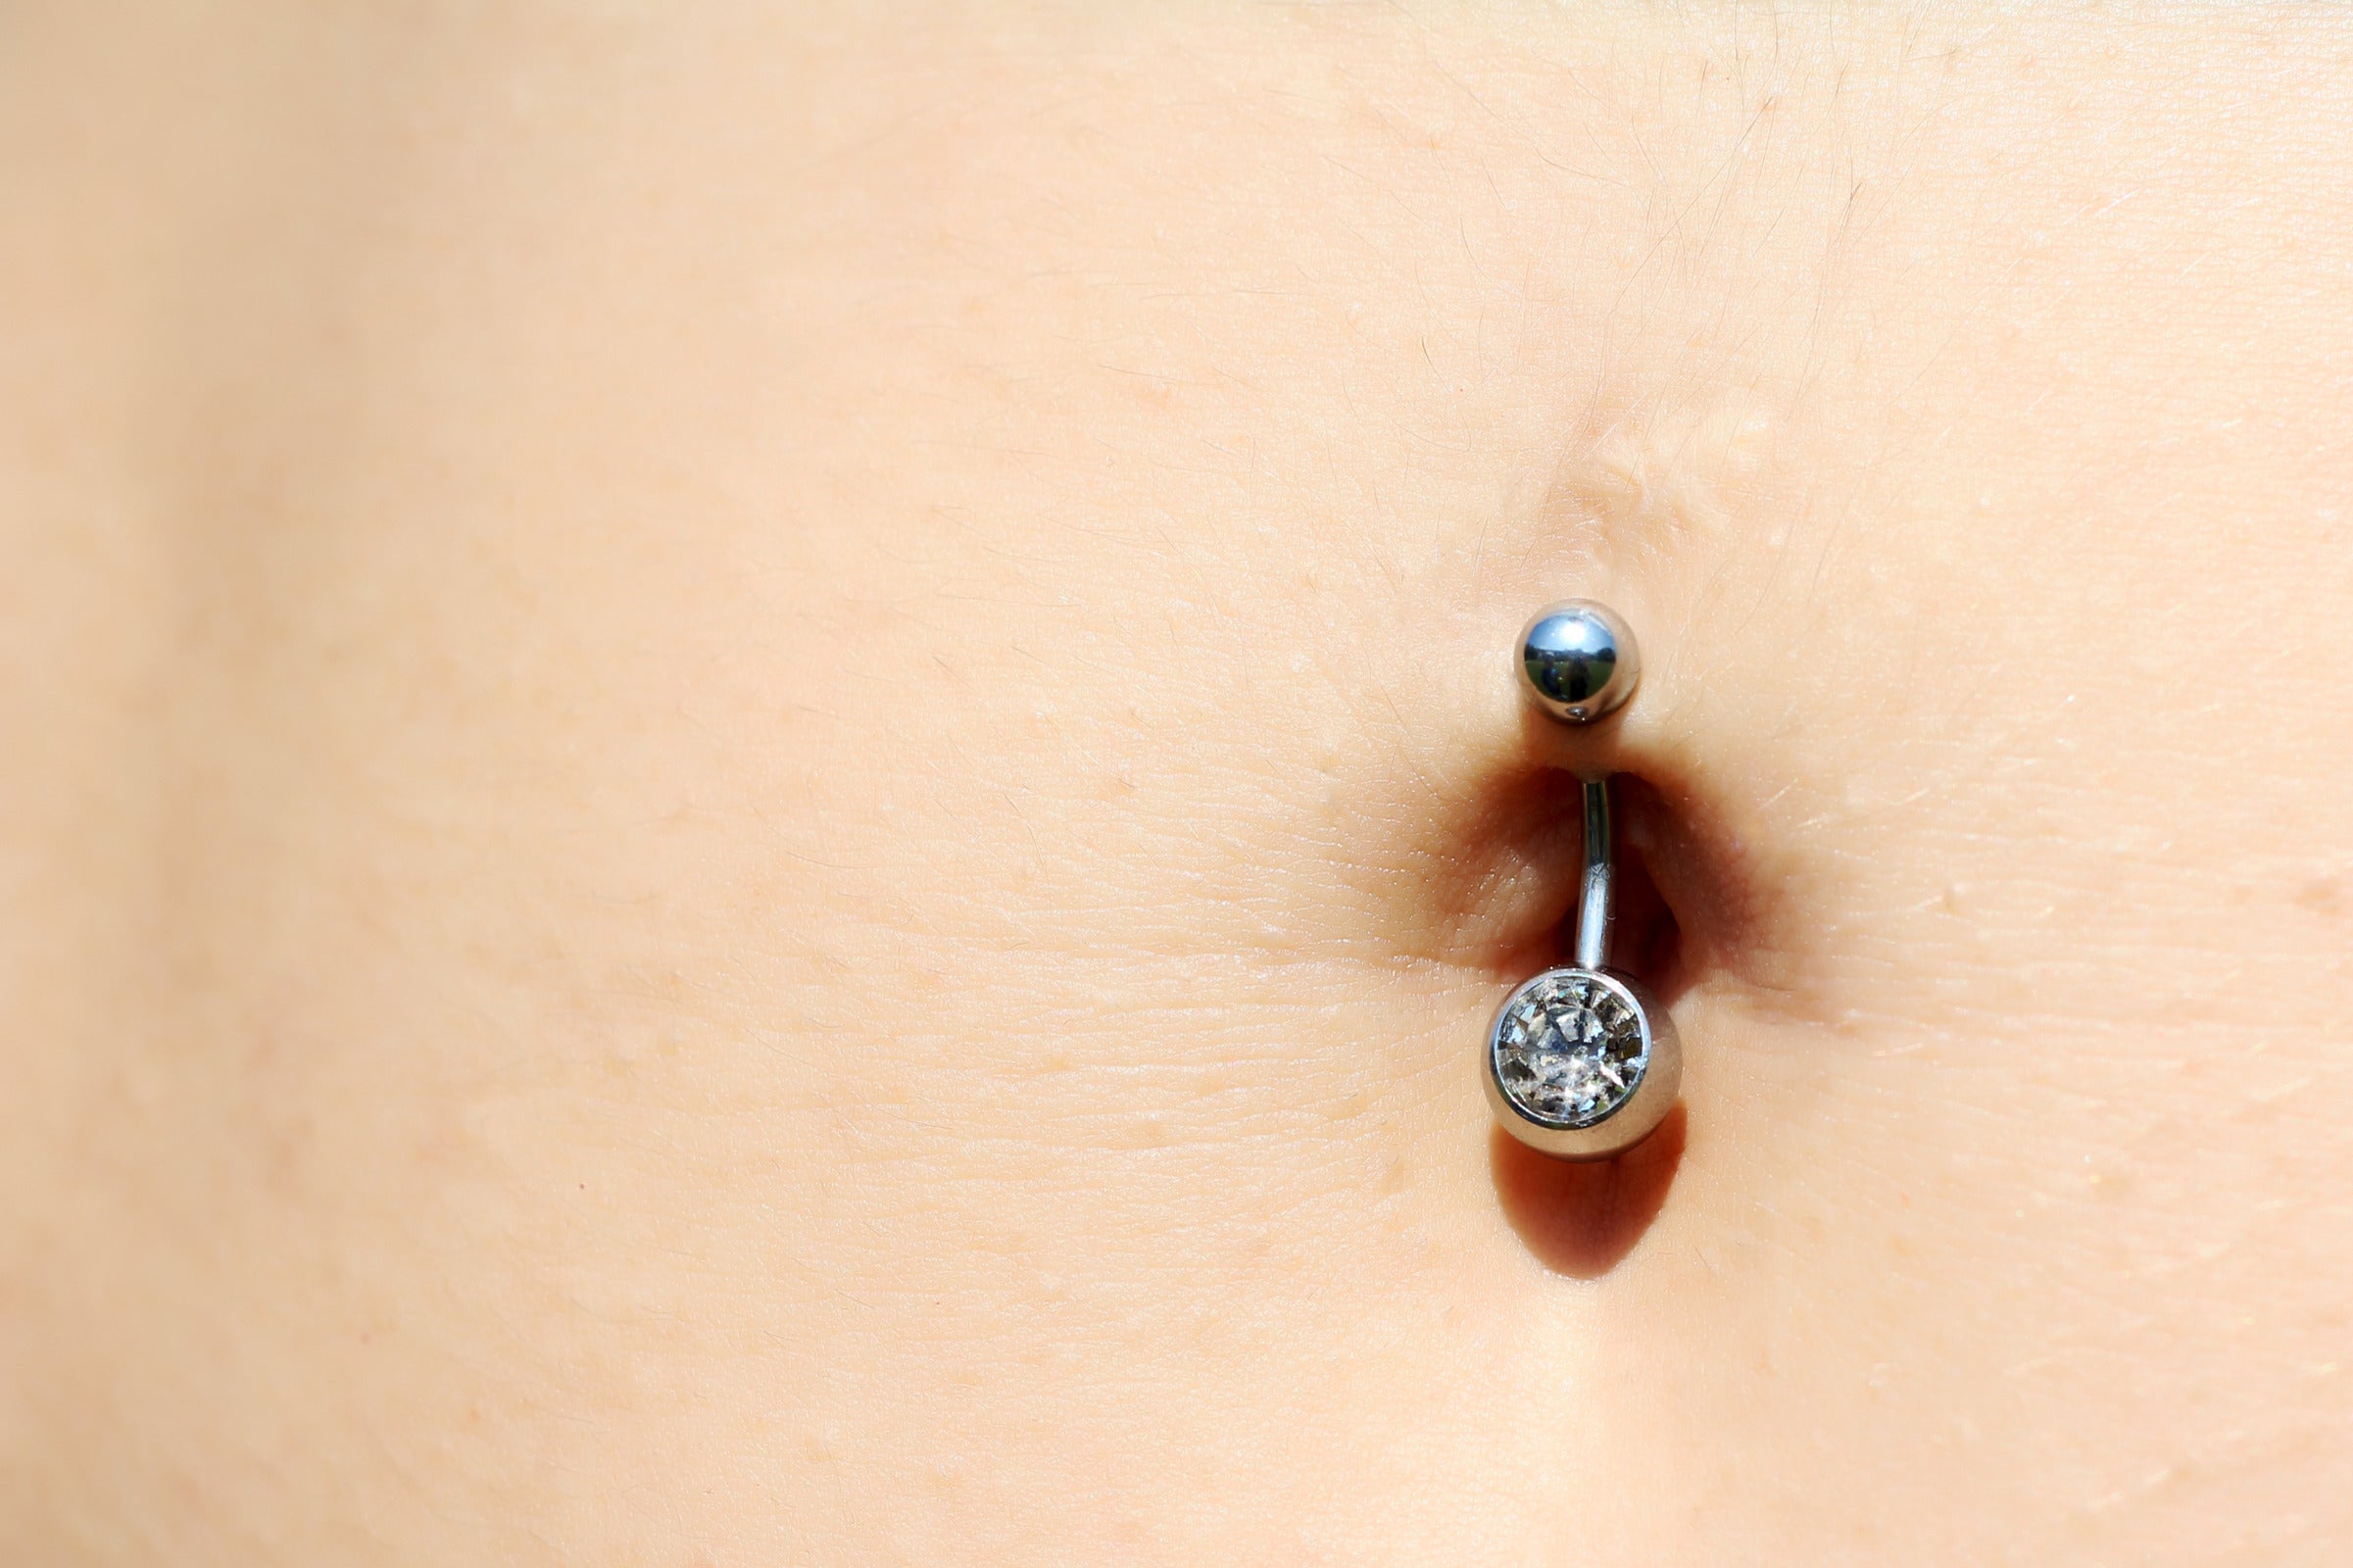 5 Belly Button Piercing With An Outie: Factors to Consider